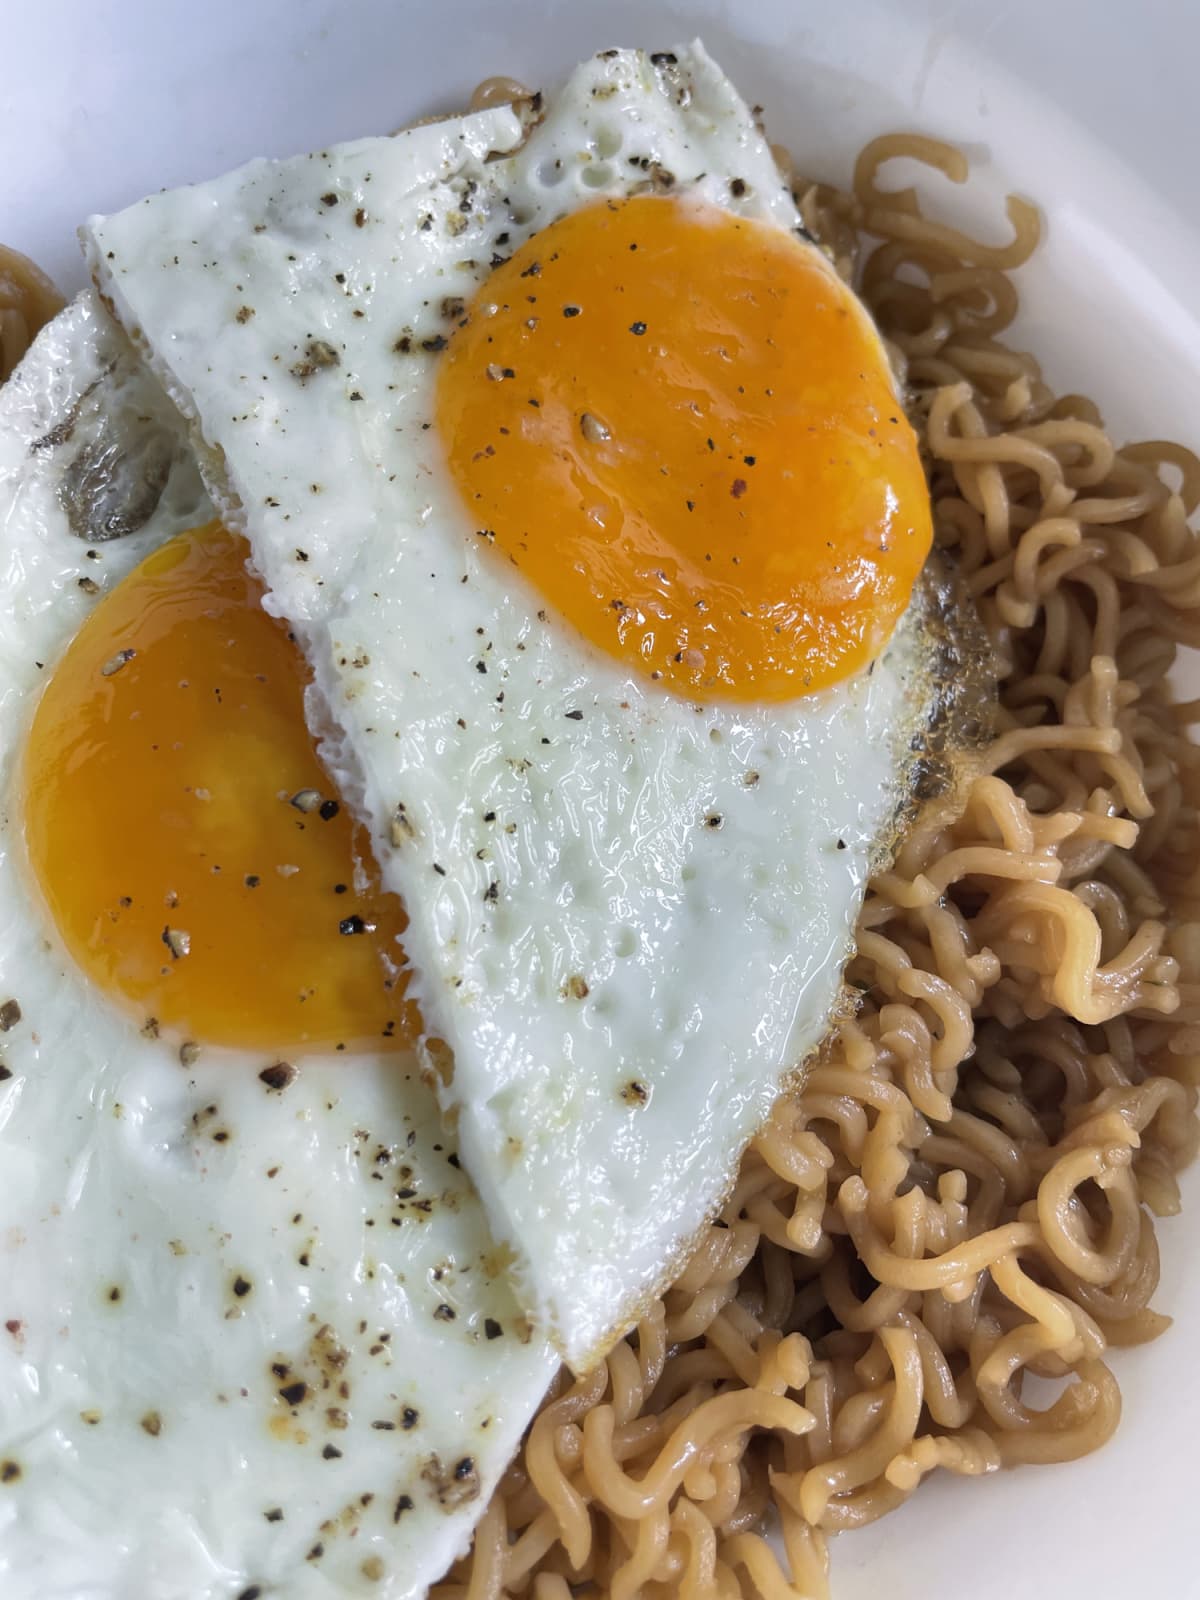 Stock photo showing elevated view of a plate containing a meal of sunny side up fried eggs seasoned with pepper served with noodles.